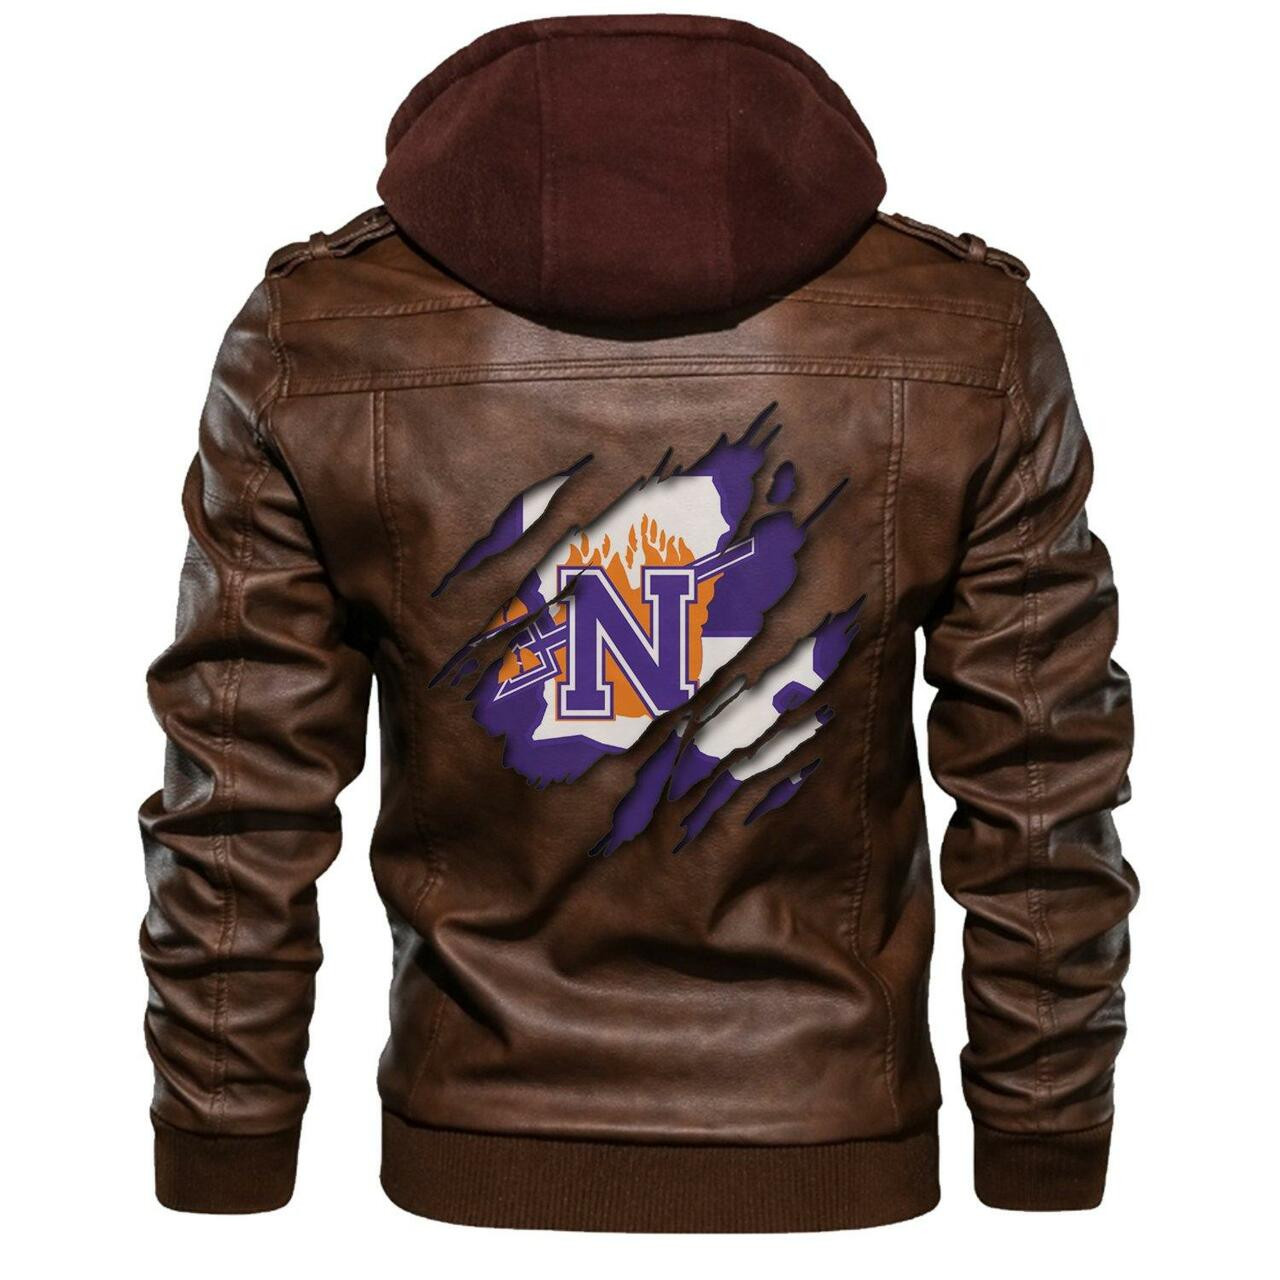 You'll have the perfect jacket in no time by clicking the link below 127